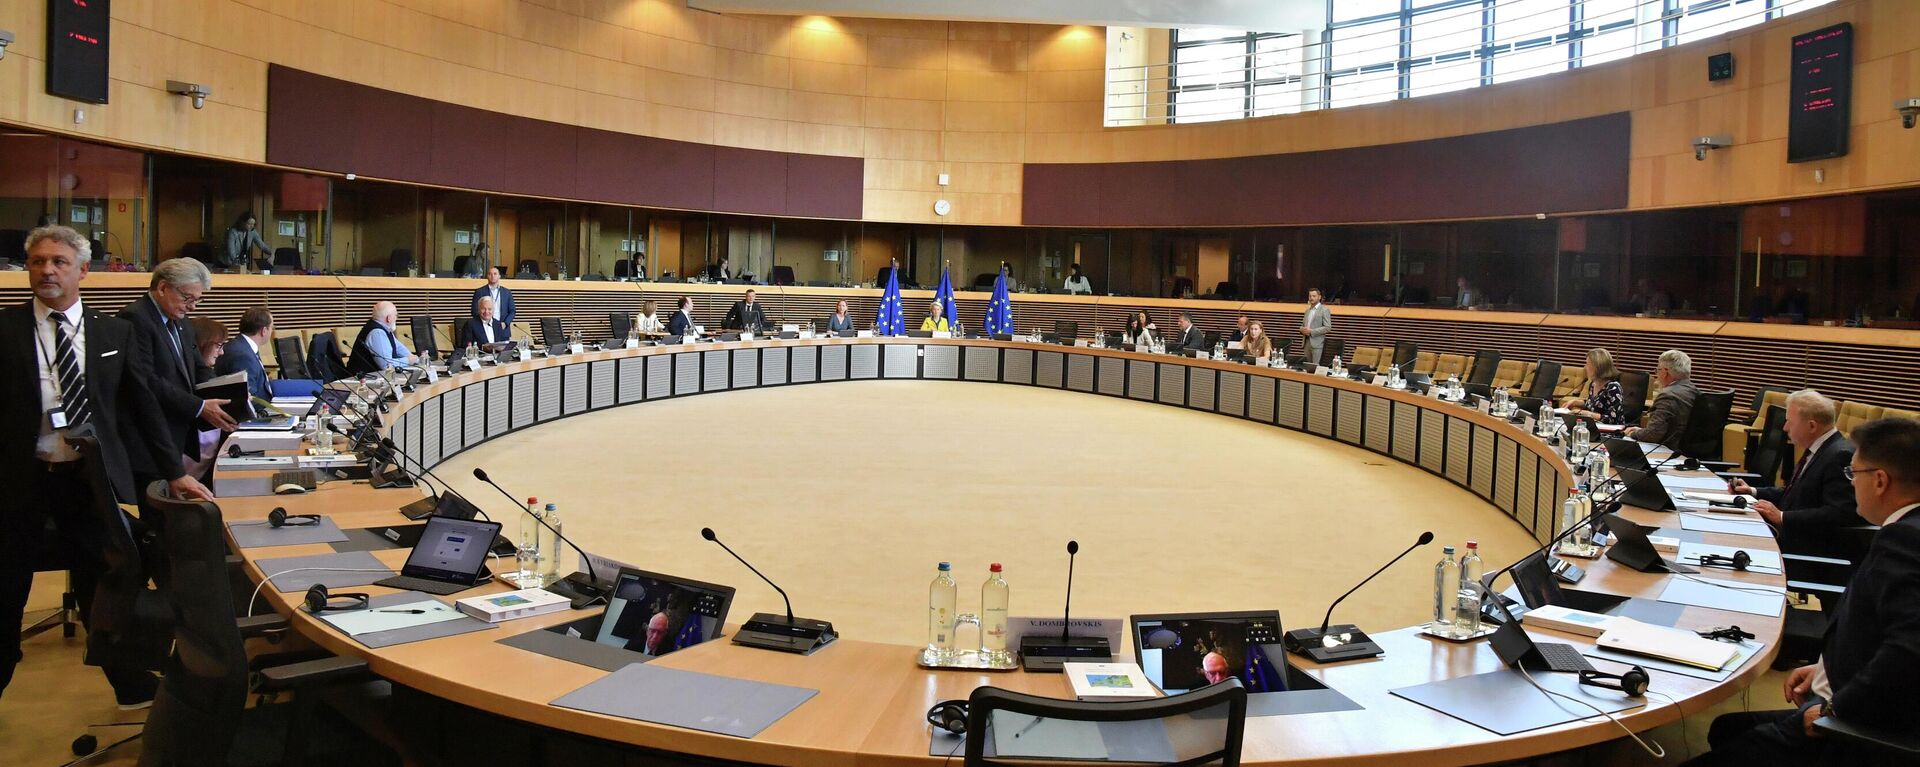 European Commission President Ursula von der Leyen, center, chairs a meeting of the College of Commissioners at EU headquarters in Brussels, Friday, June 17, 2022 - Sputnik International, 1920, 14.09.2022